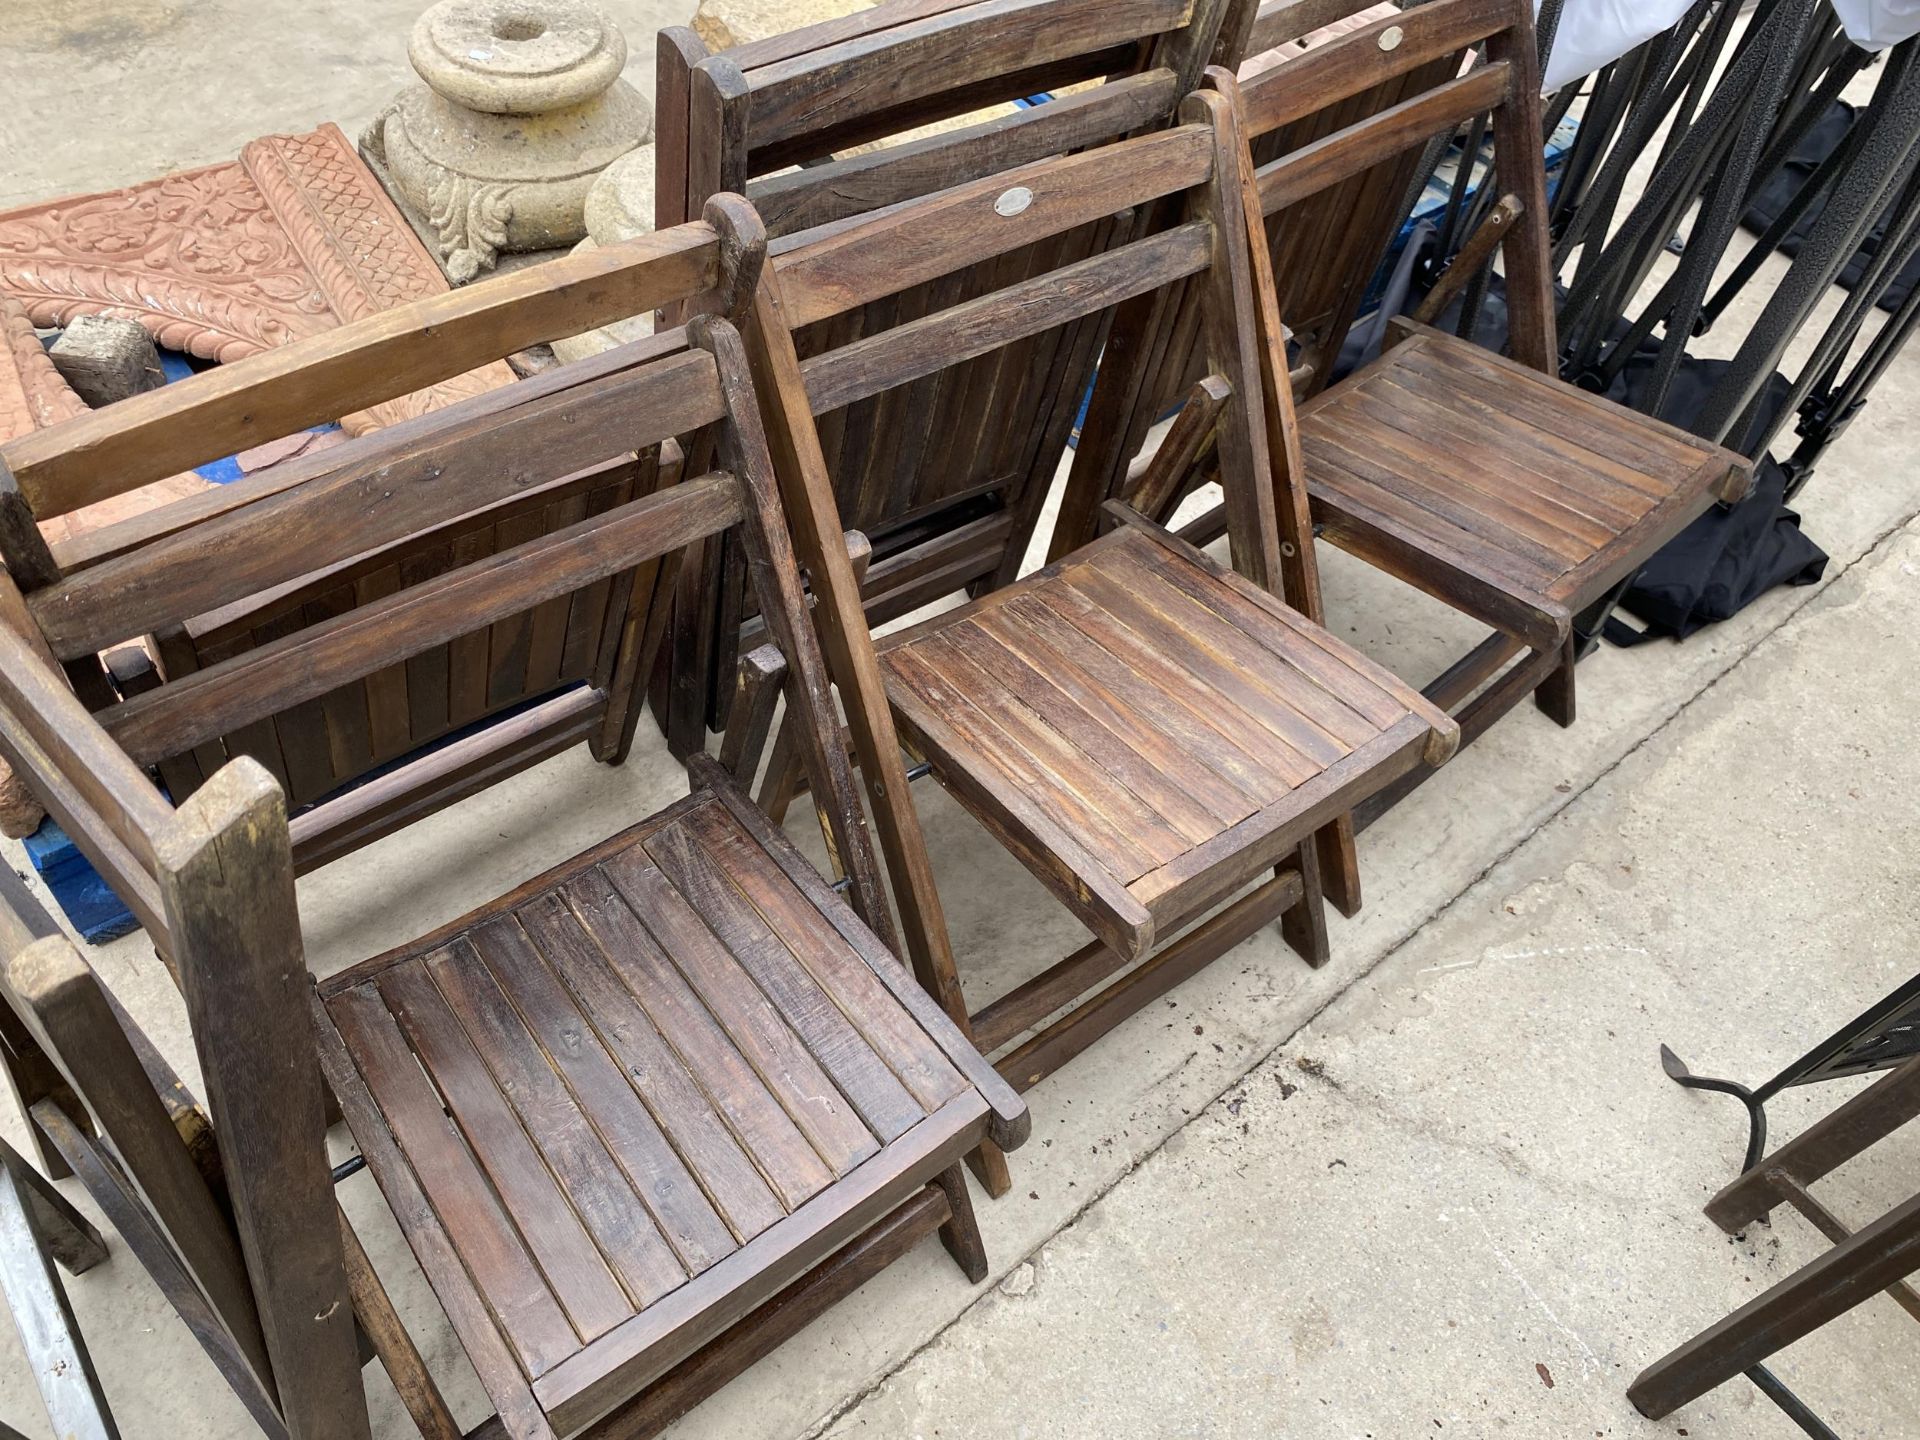 A BOXED AS NEW SET OF FIVE VINTAGE WOODEN FOLDING GARDEN CHAIRS (IMAGE SHOWS UNBOXED EXAMPLES)